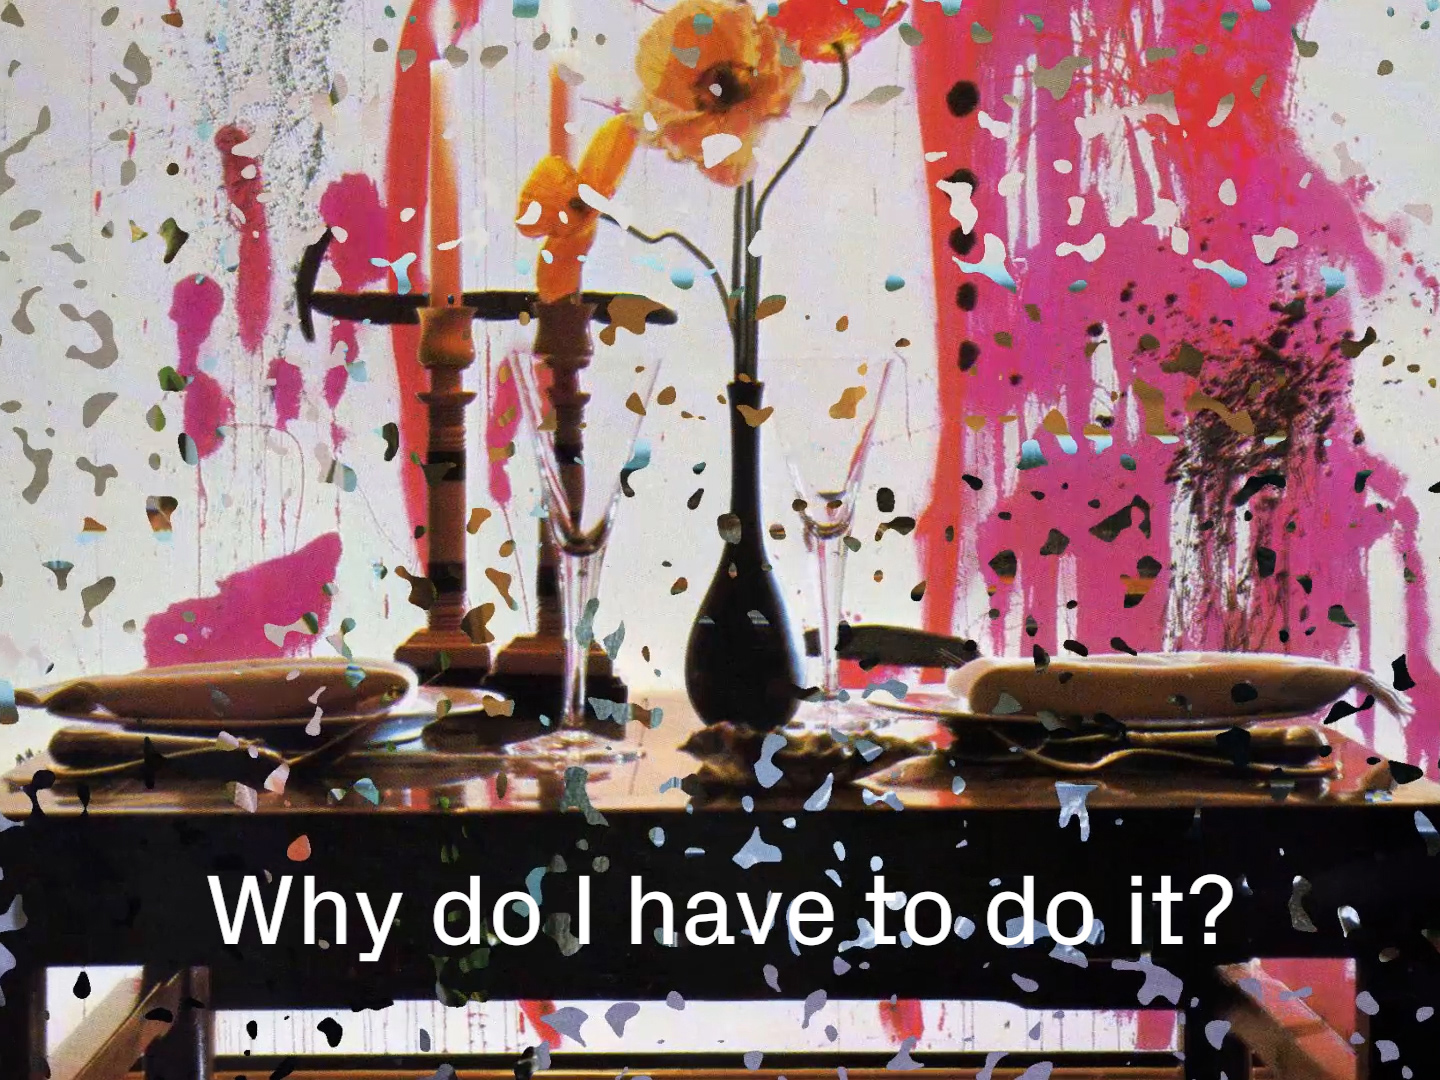 A still-life with pieces of another image coming through. A closed caption reads: Why do I have to do it?